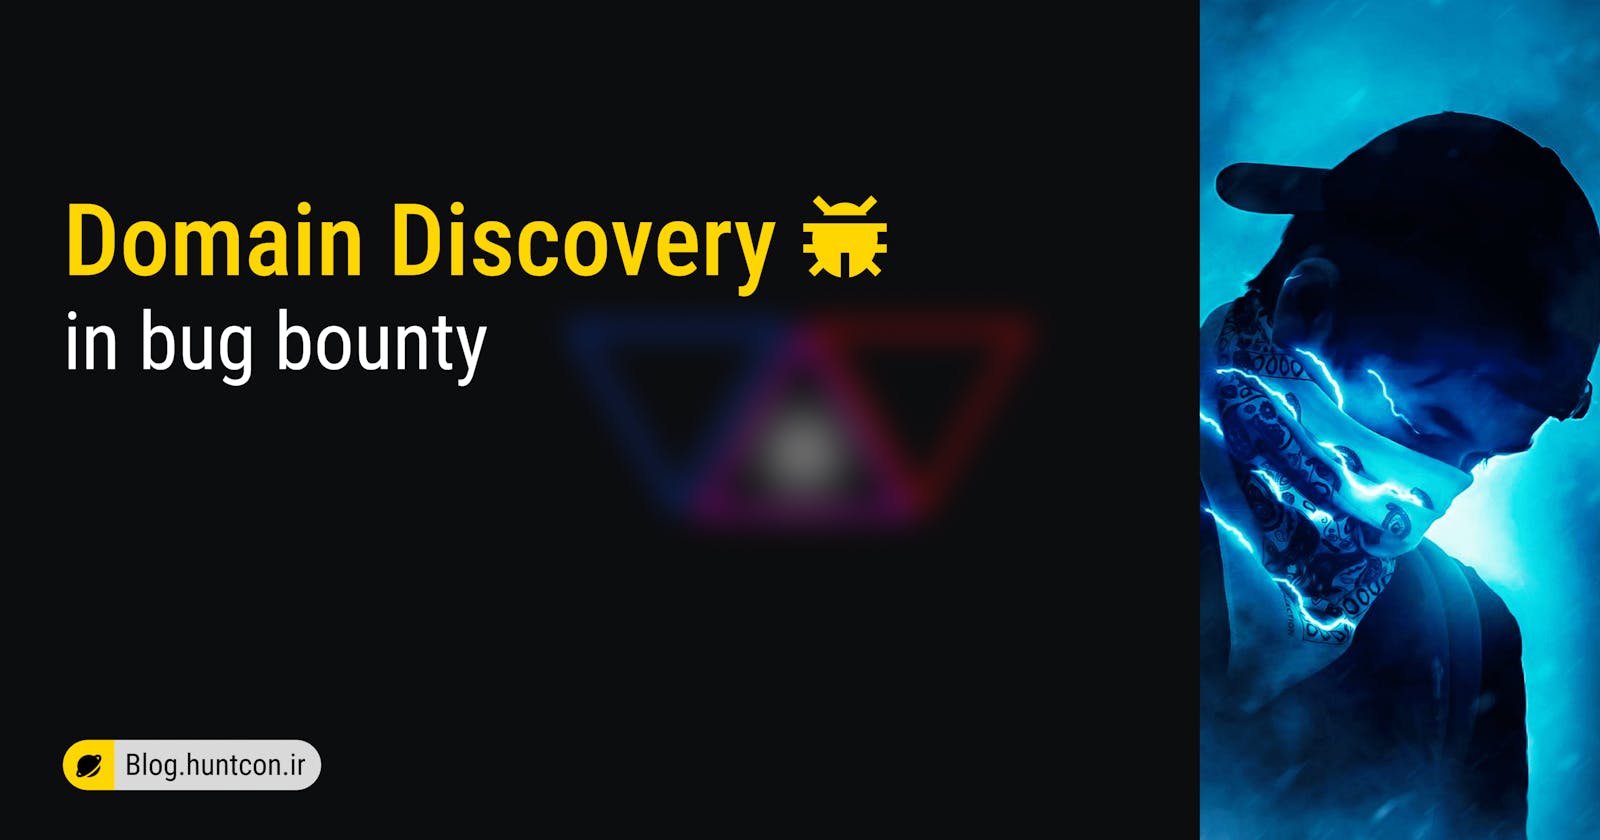 Domain discovery in bug bounty.